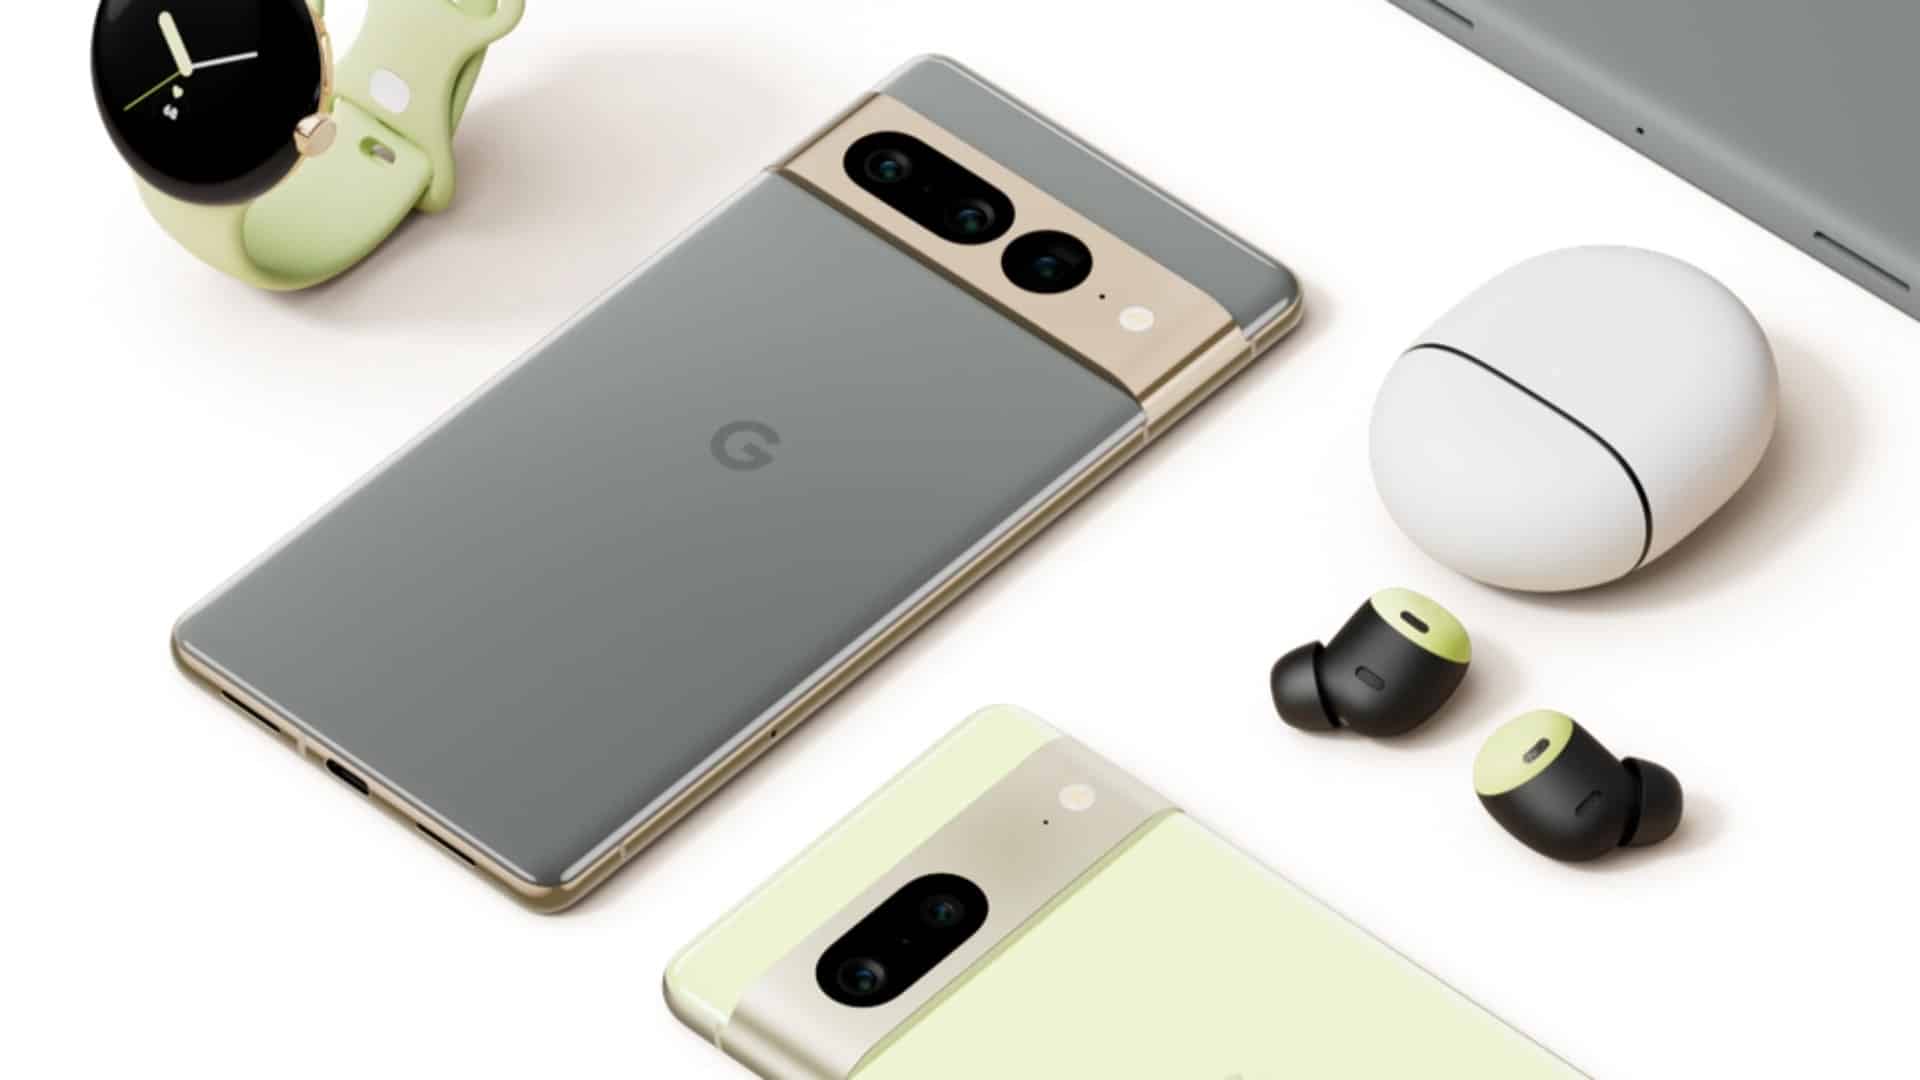 Pixel 7 Pro along with Pixel 7, Pixel Buds, and Pixel Watch placed on table.